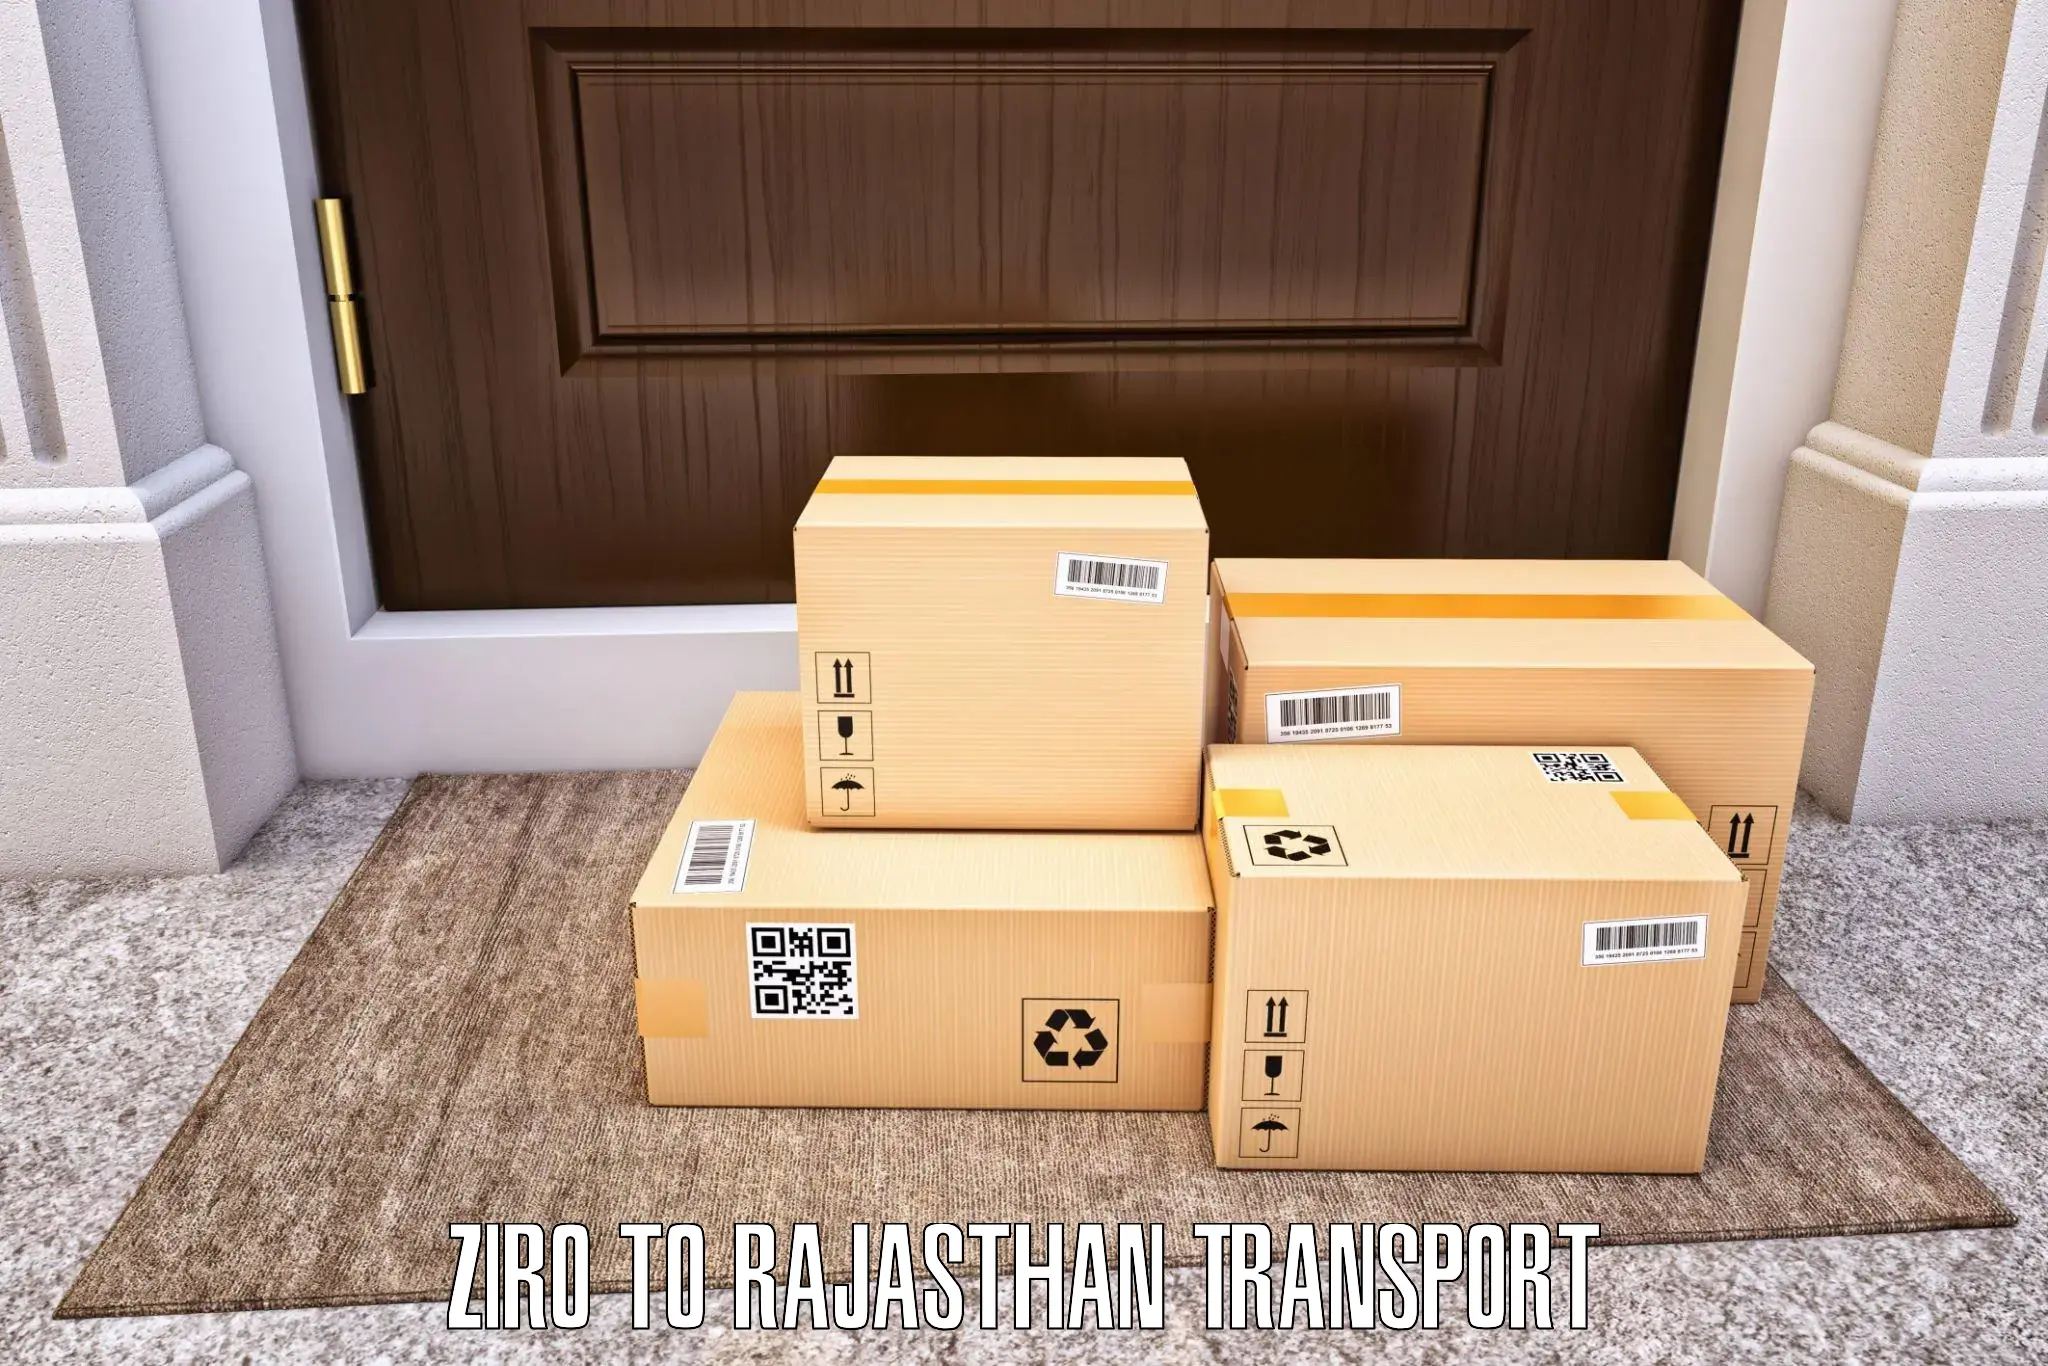 Luggage transport services Ziro to Rajasthan